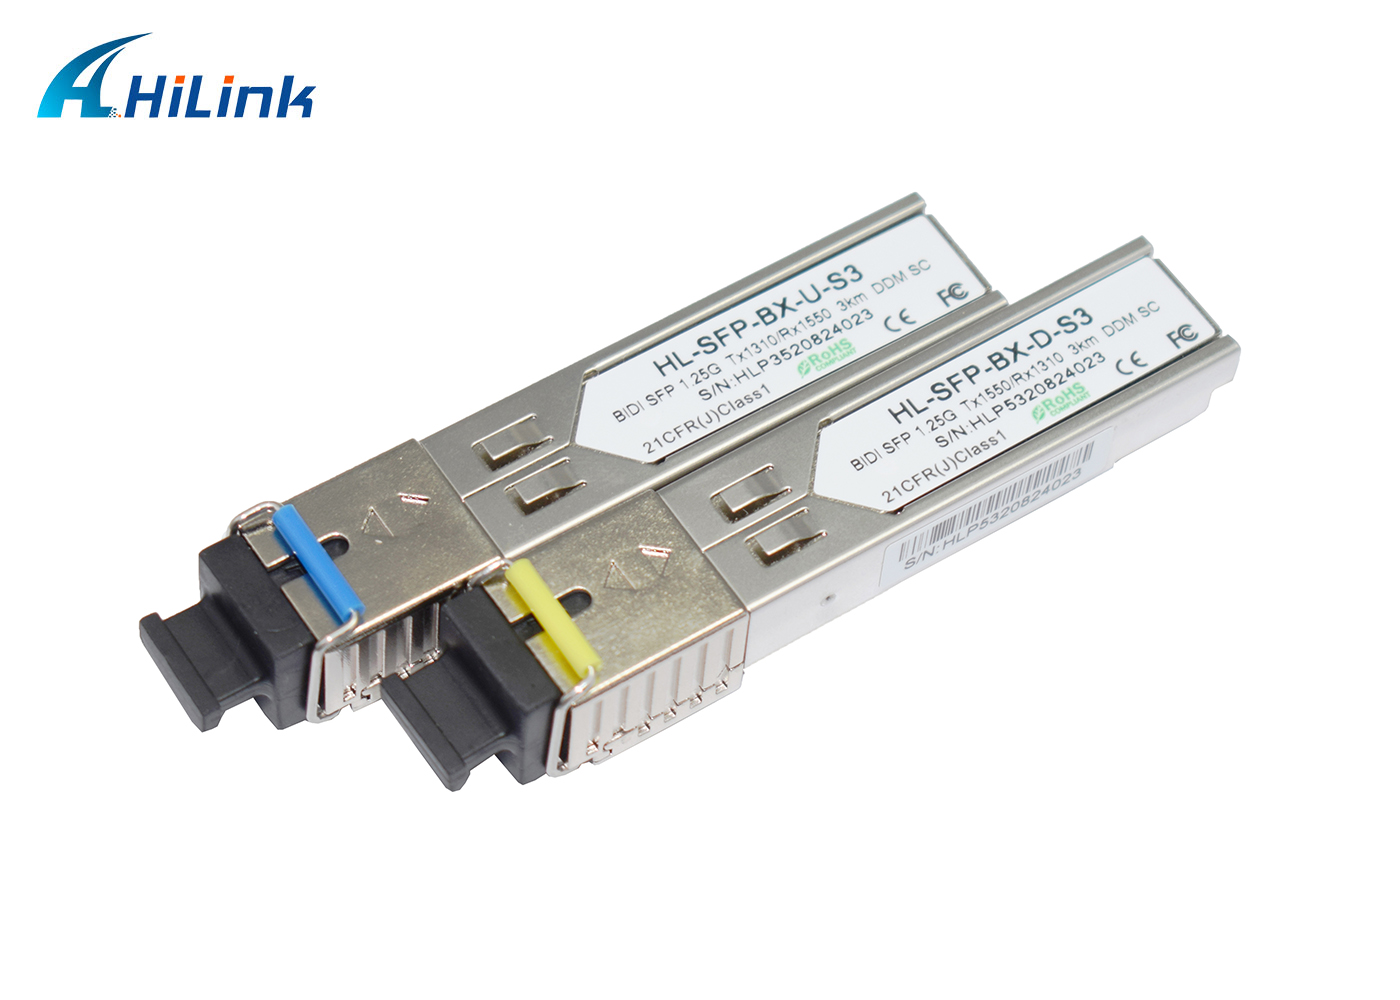 In fiber optic communications, optical transceivers are designed to transmit and receive optical signals. Commonly used transceiver modules are hot-swappable I/O (input/output) devices.